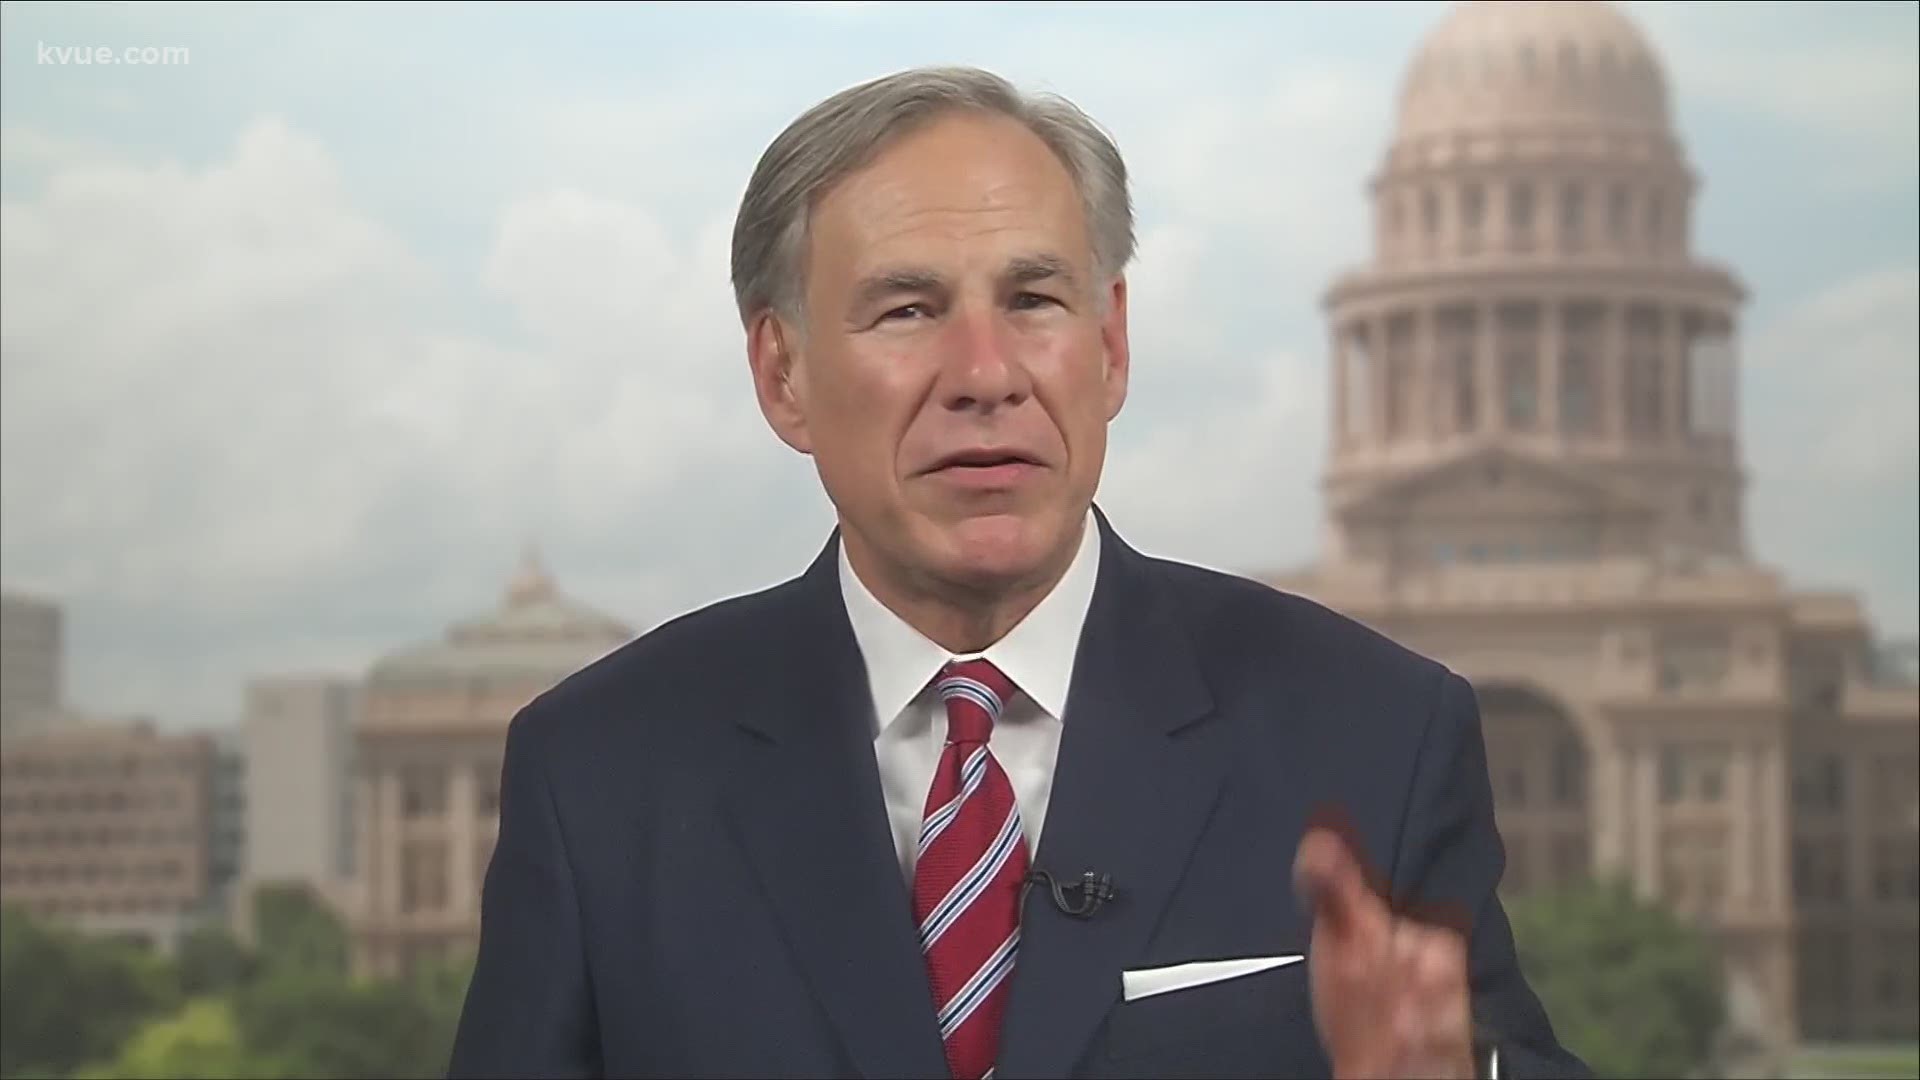 Gov. Greg Abbott spoke with KVUE Political Anchor Ashley Goudeau about the State's ongoing response to the COVID-19 pandemic.